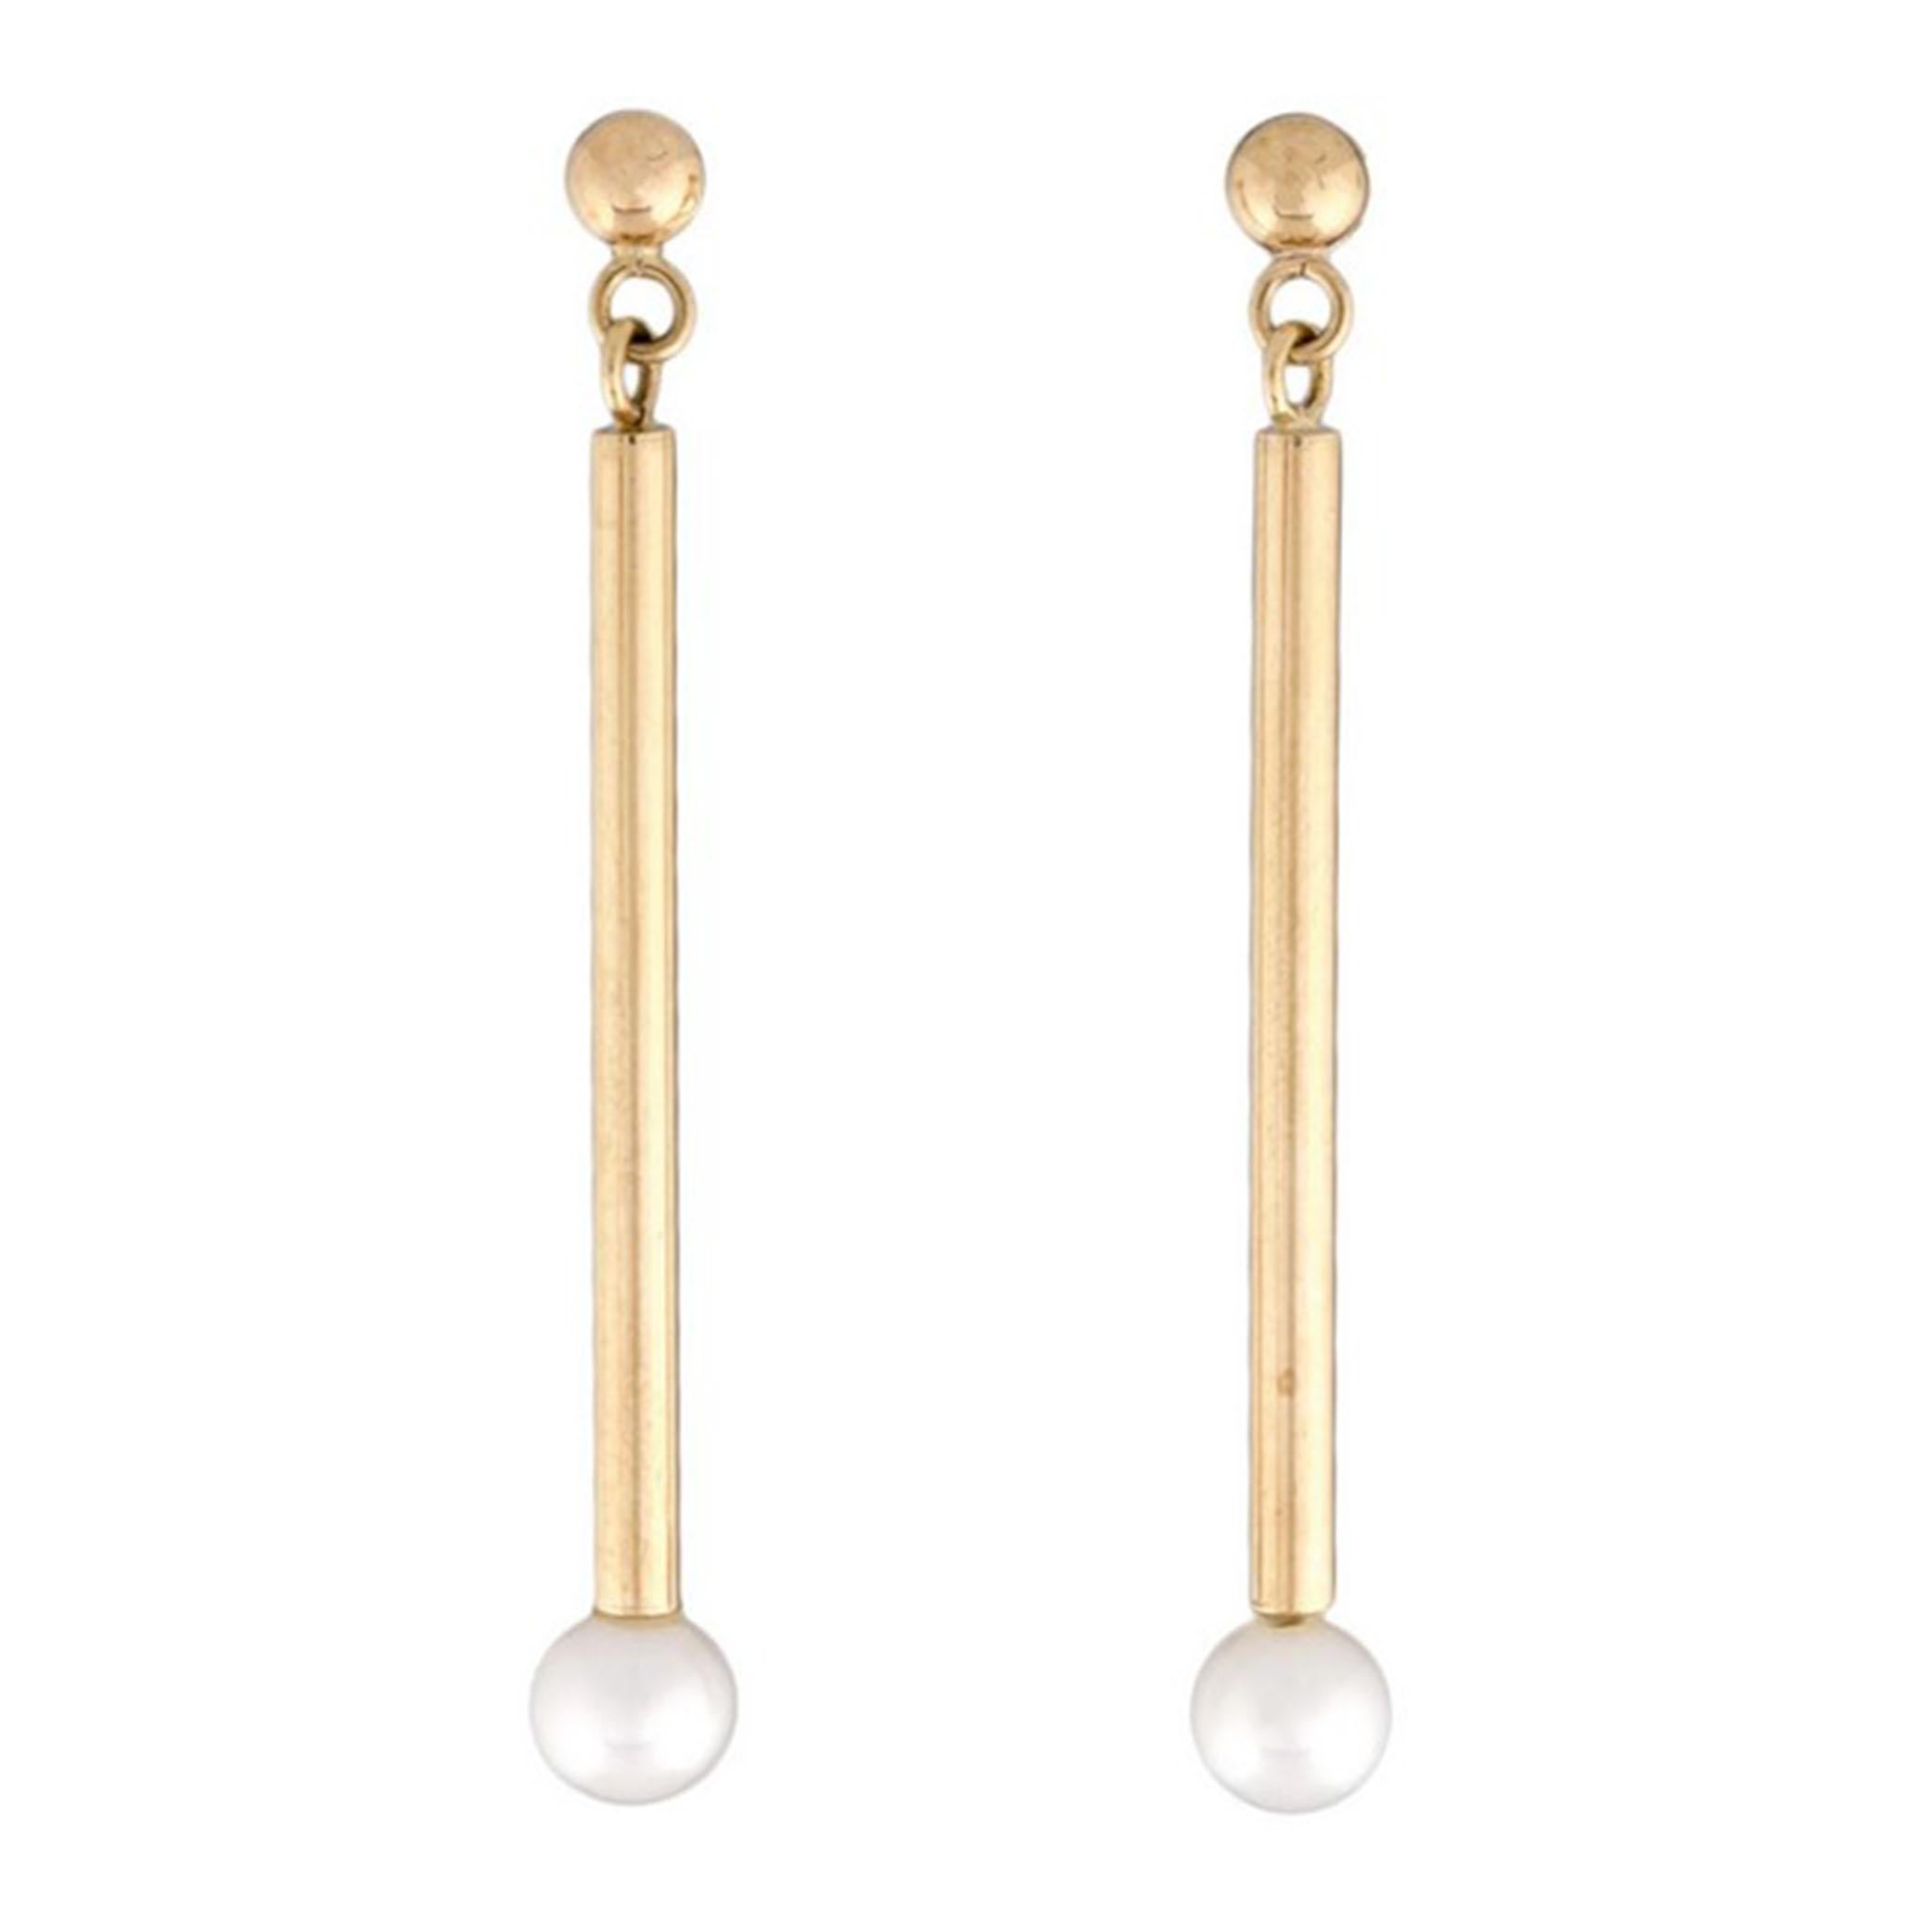 Modern Japanese cultured akoya pearl stick earrings featured in high polished 14k yellow gold.  The pearls are 6.5 - 6mm in size and dangle about 1